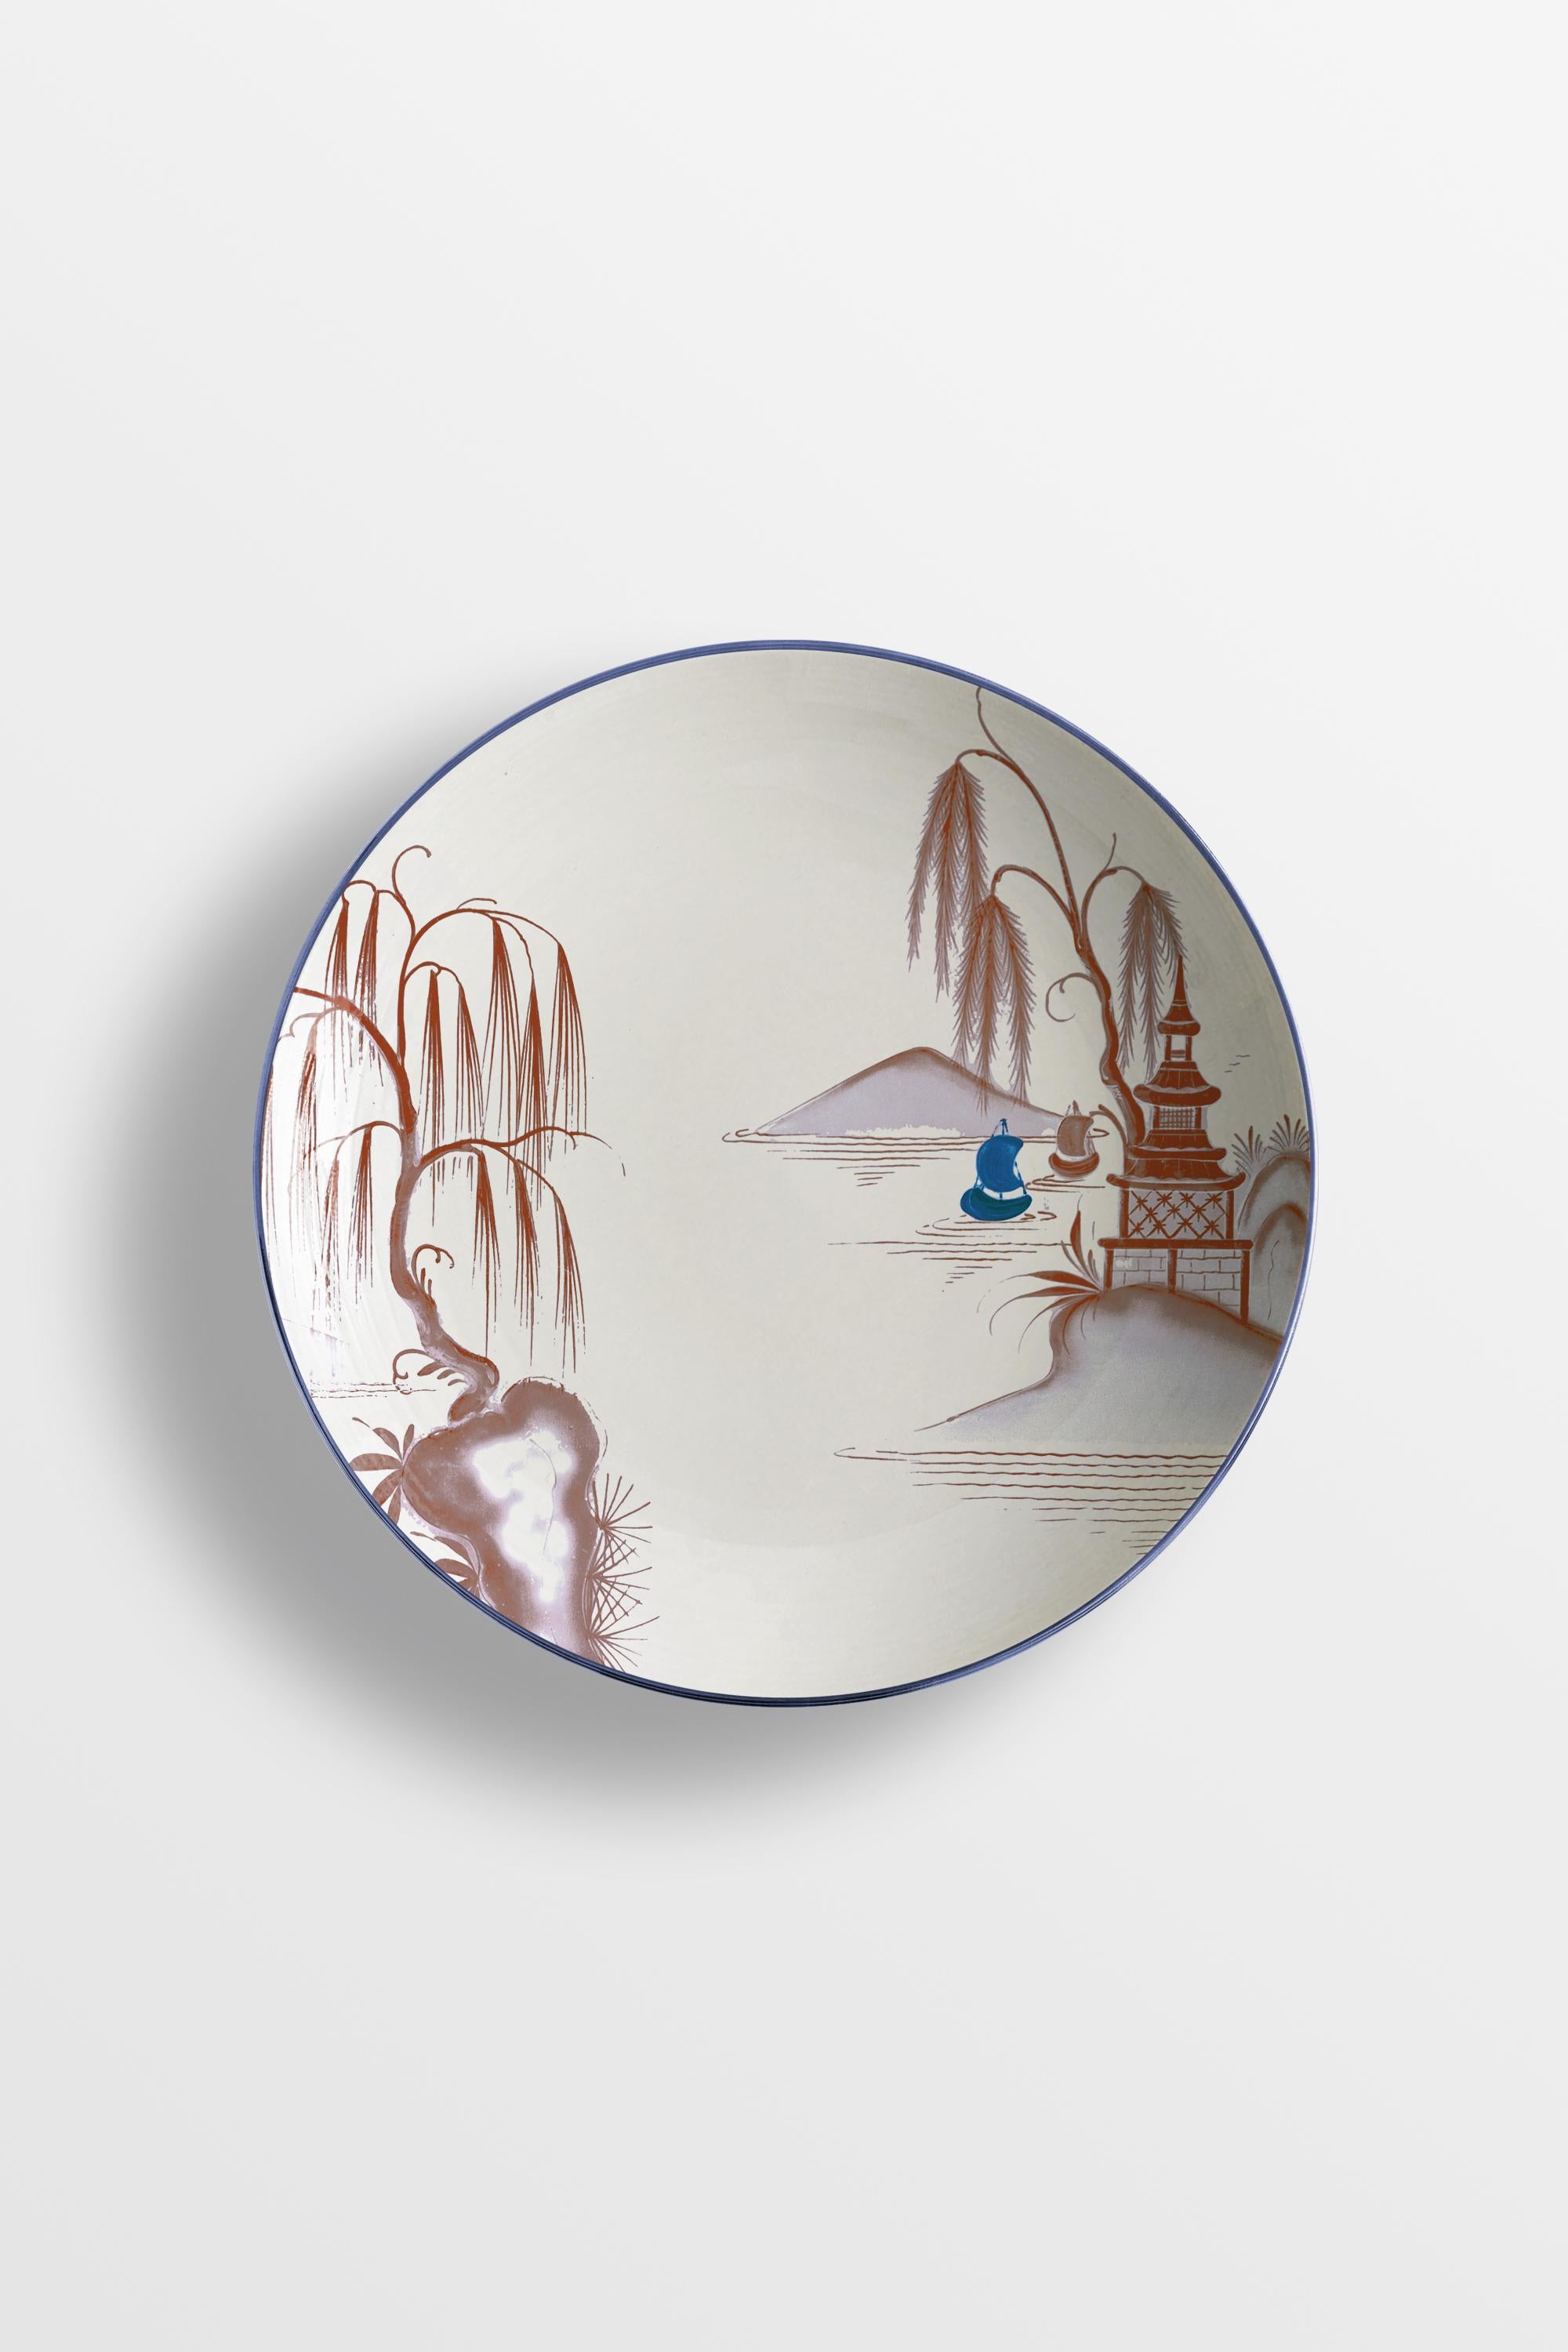 Bordeaux and blue are the primary colors of this Japan inspired collection of plates, where ancient Japanese scenes take place on the rivers of a fairy lake.
6 Soup plates.